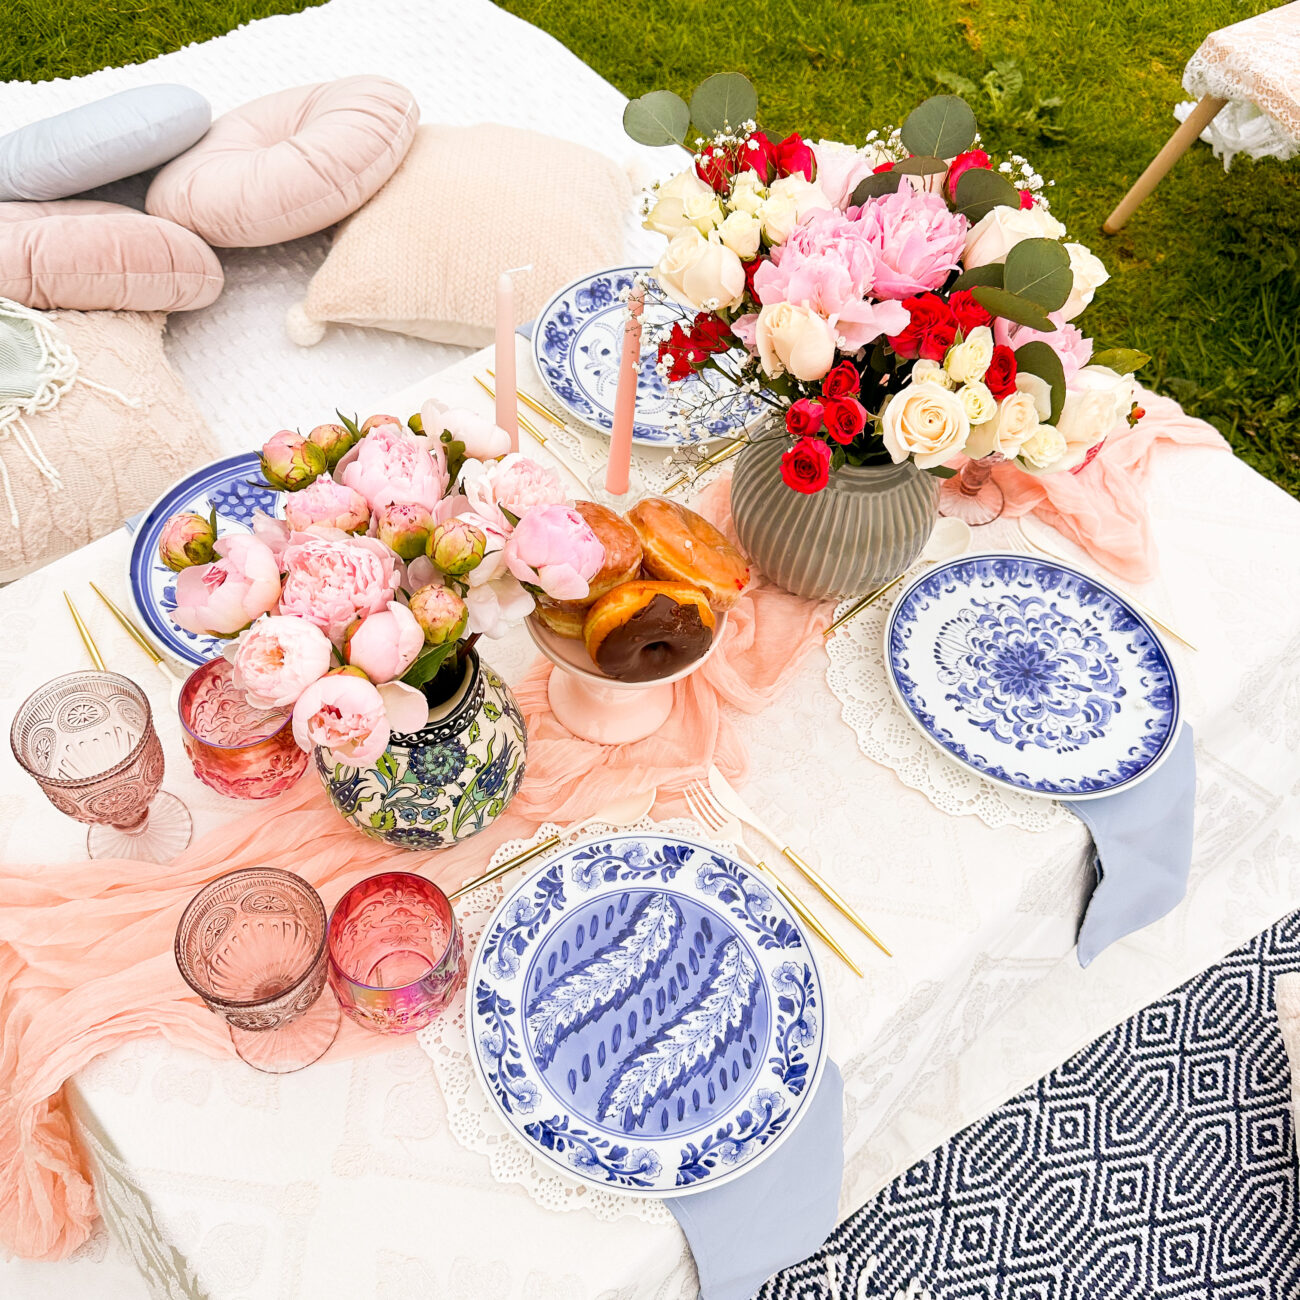 Luxurious park picnic setup with peony centerpiece, candles, and donuts ready to be savored